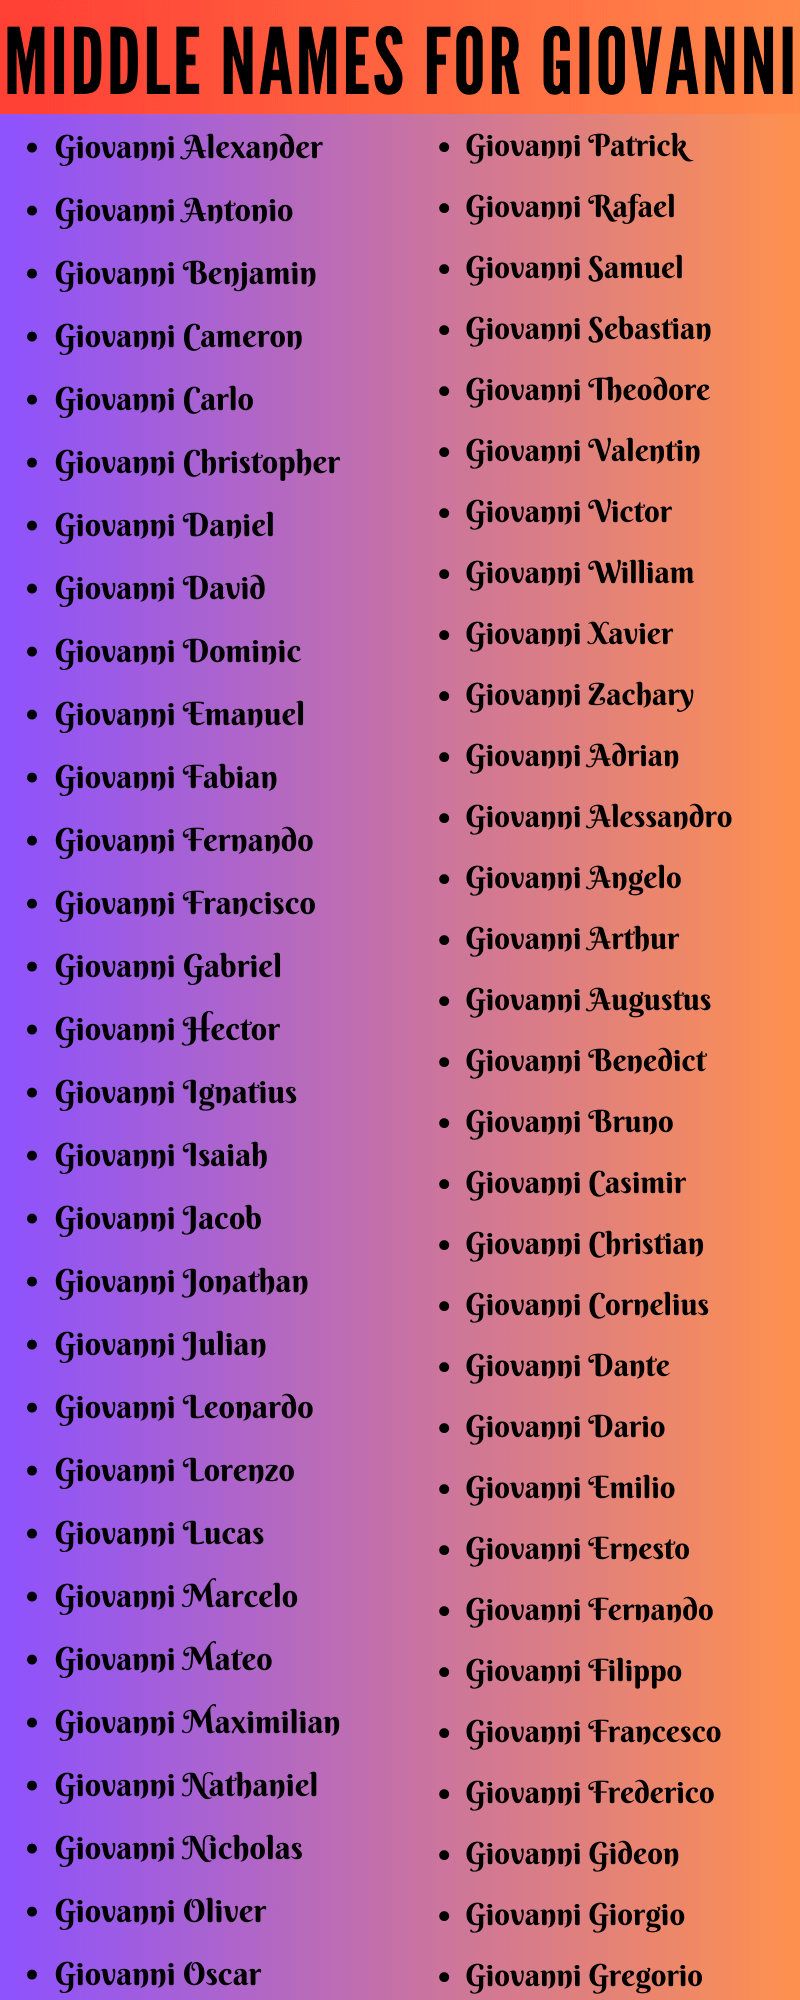 400 Best Middle Names For Giovanni That You Will Like